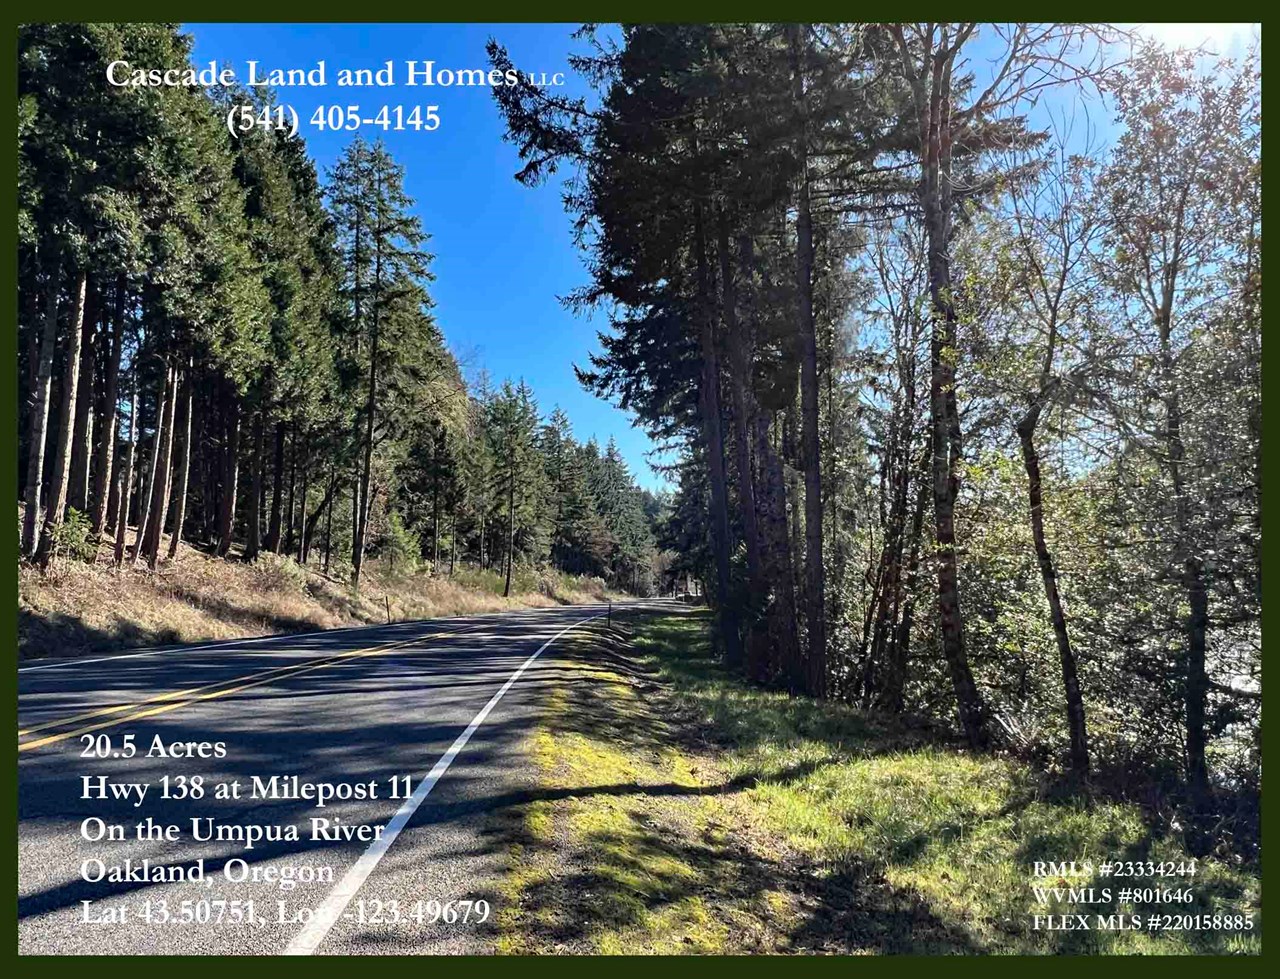 the property has easy access off of hwy 138, the umpqua river scenic byway.